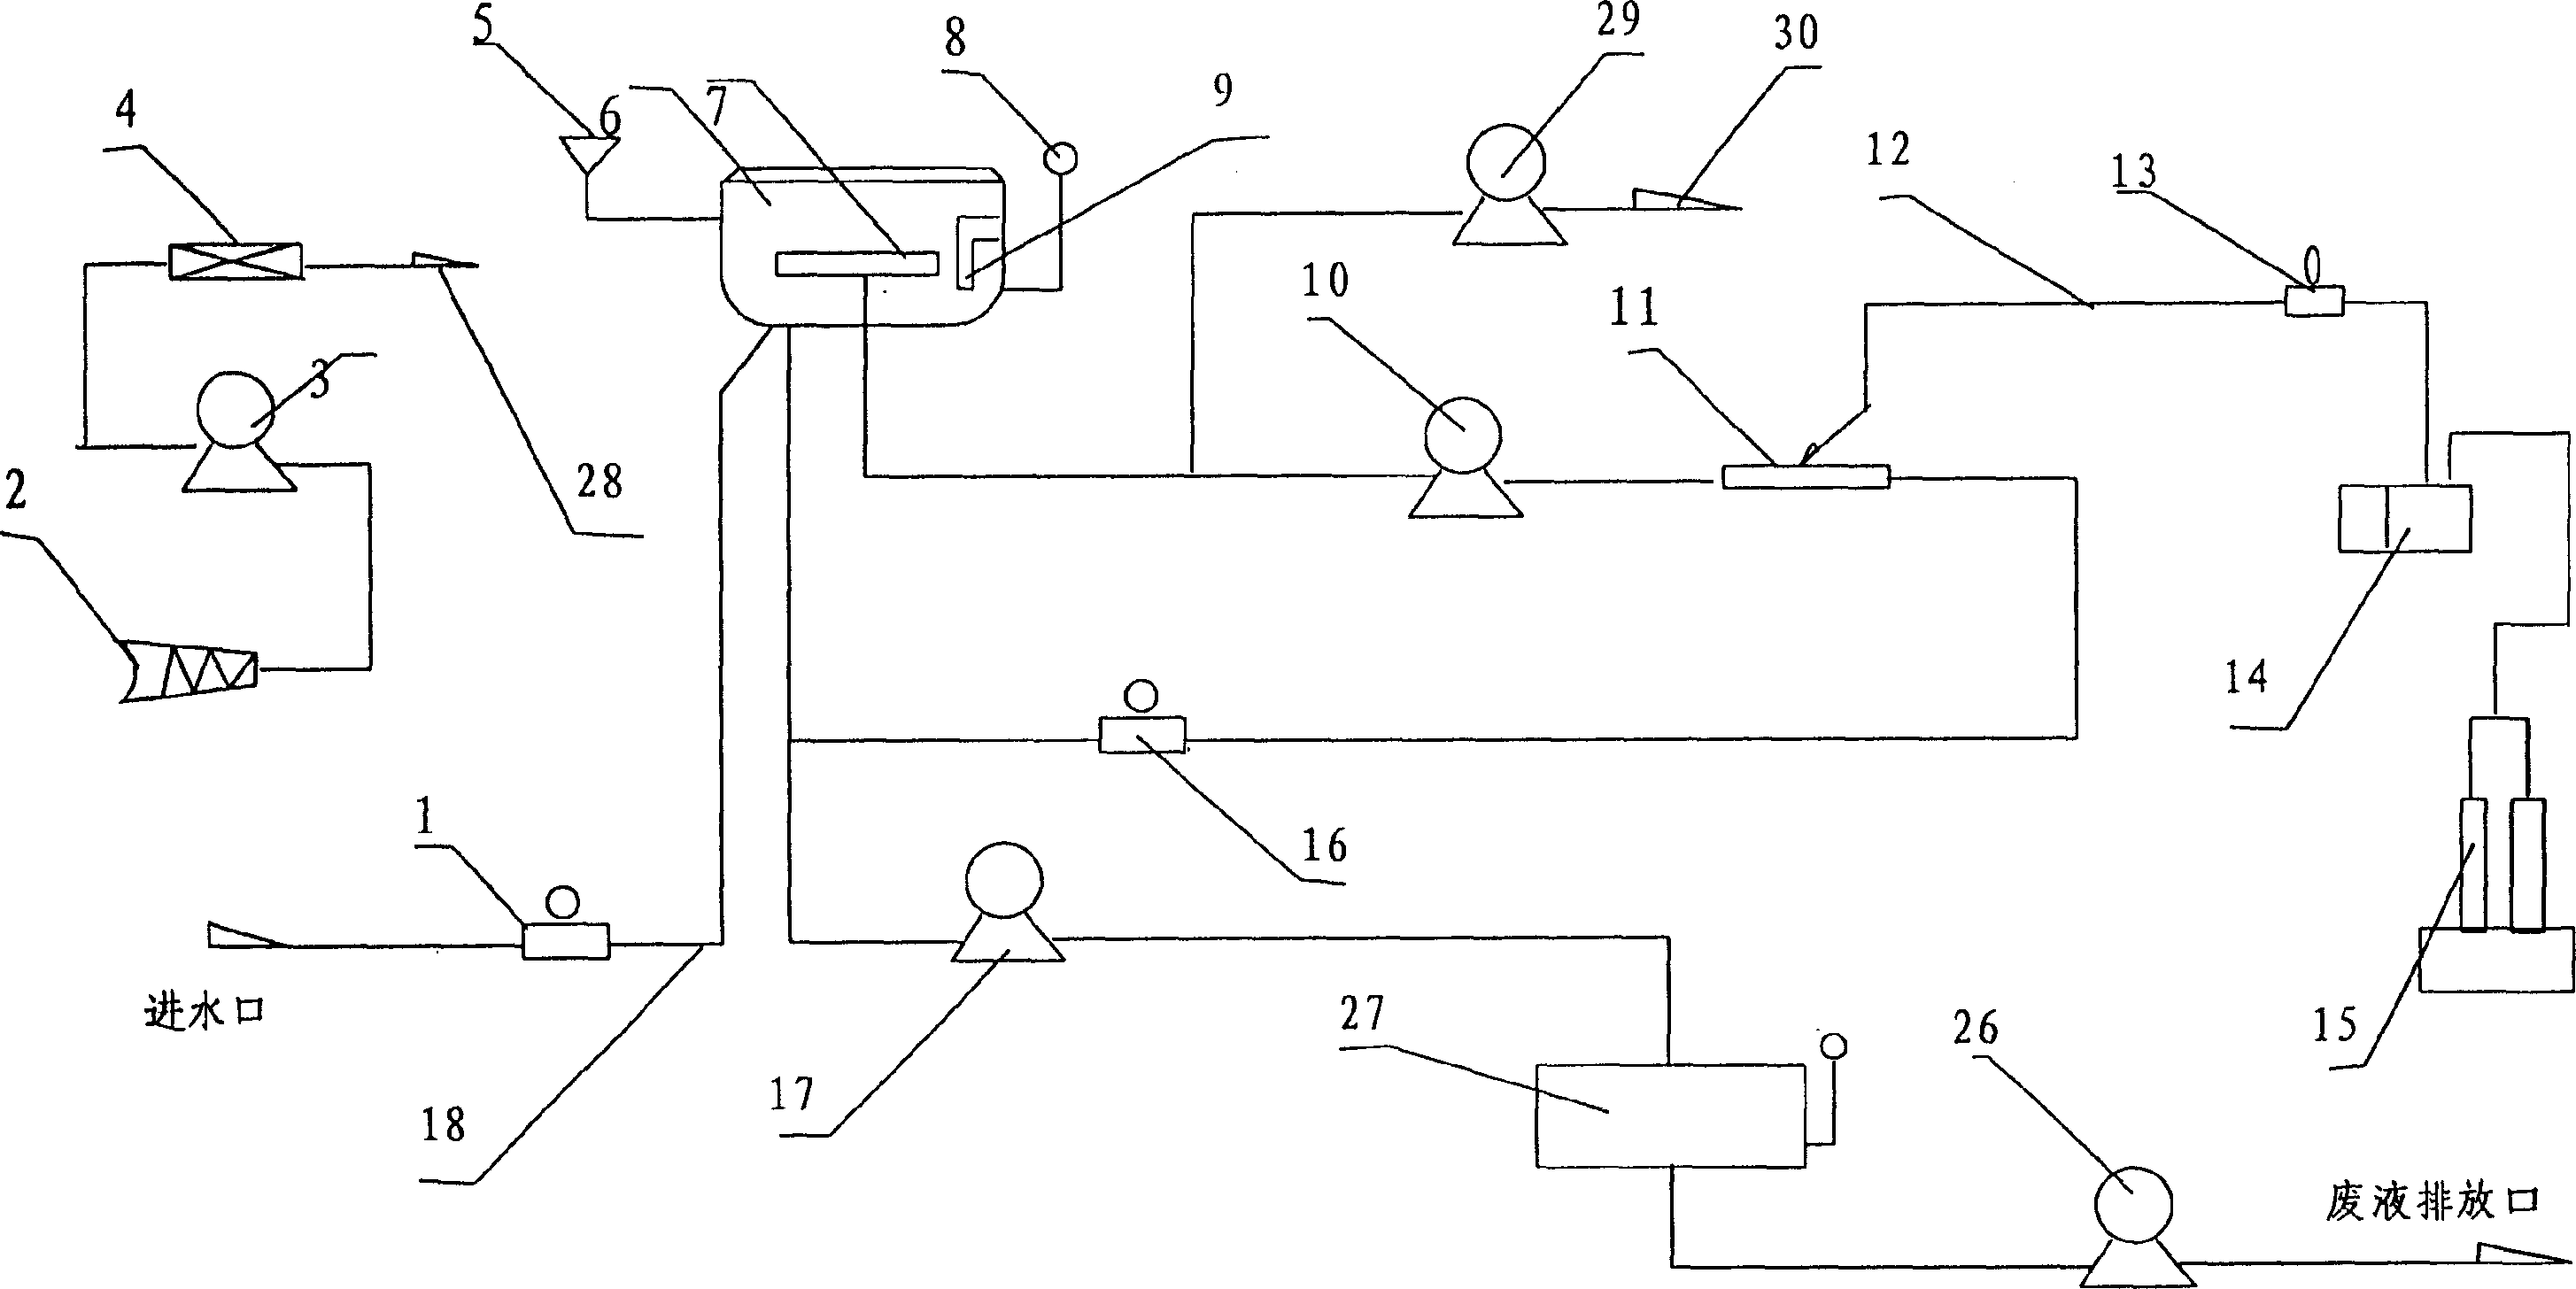 Method for disinfecting and sterilizing appliances as well as washing and sterilizing equipment